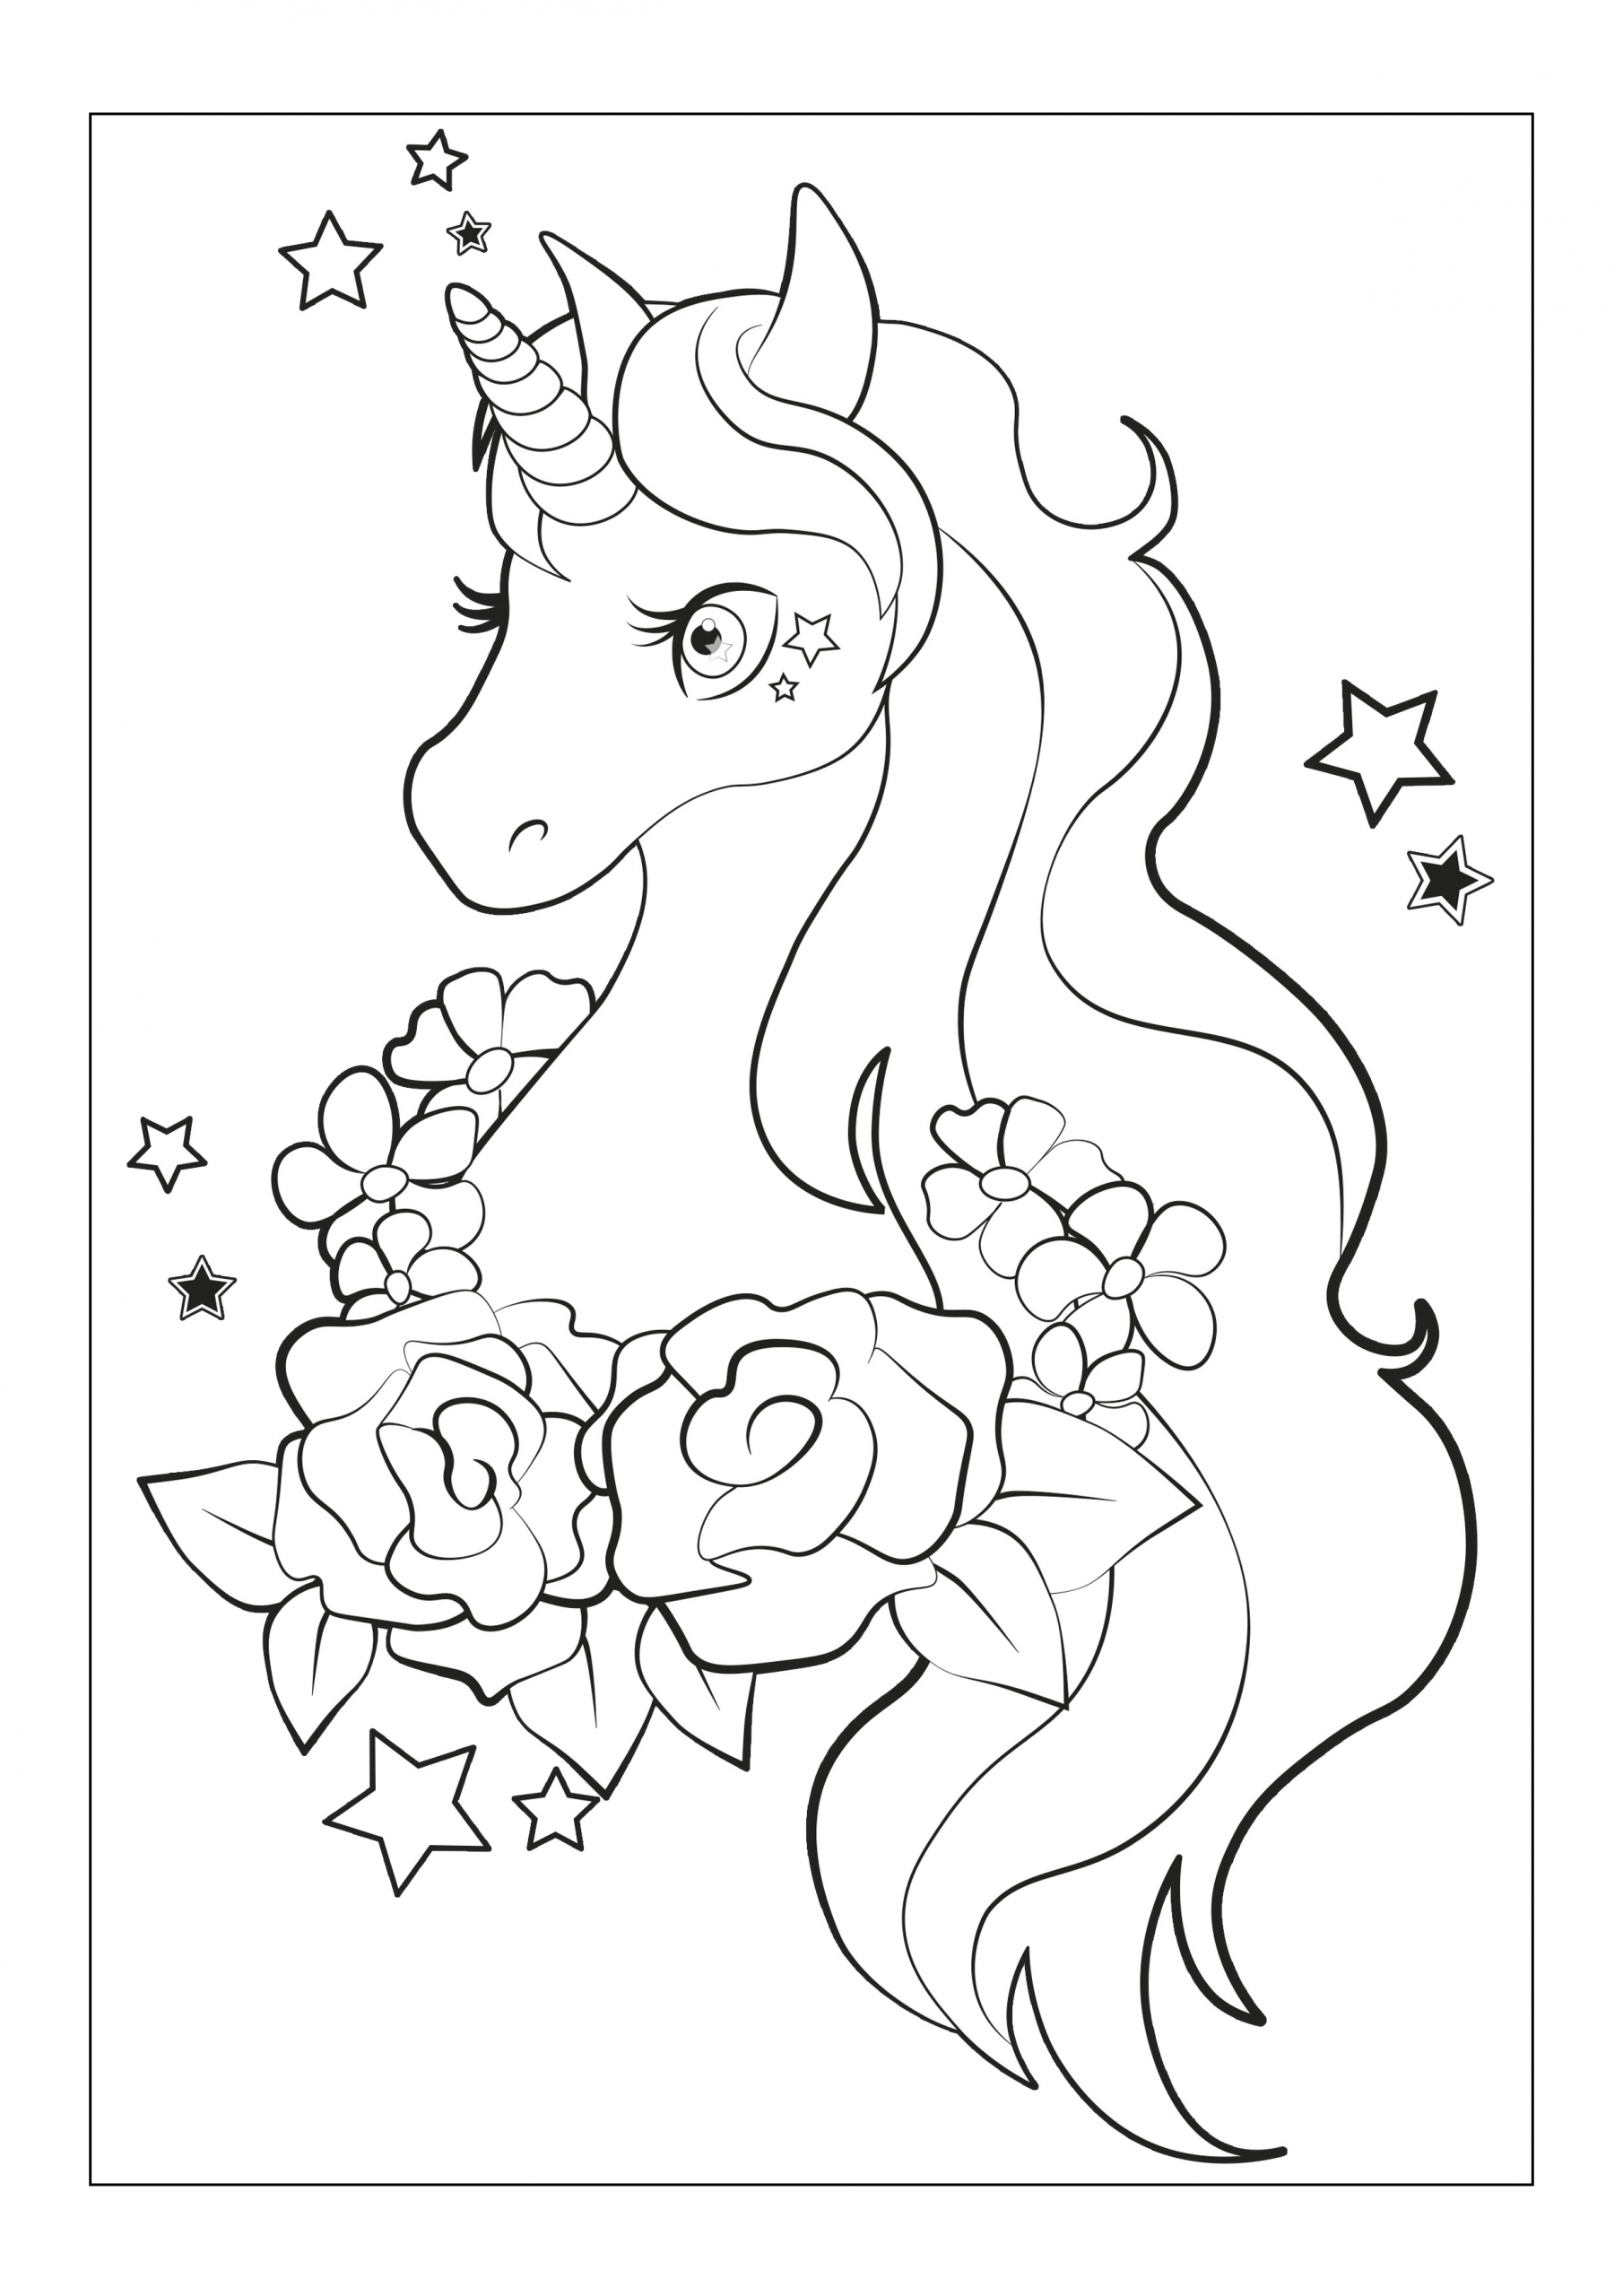 Online Coloring Pages For Girls
 The Best Free Coloring Pages For Girls